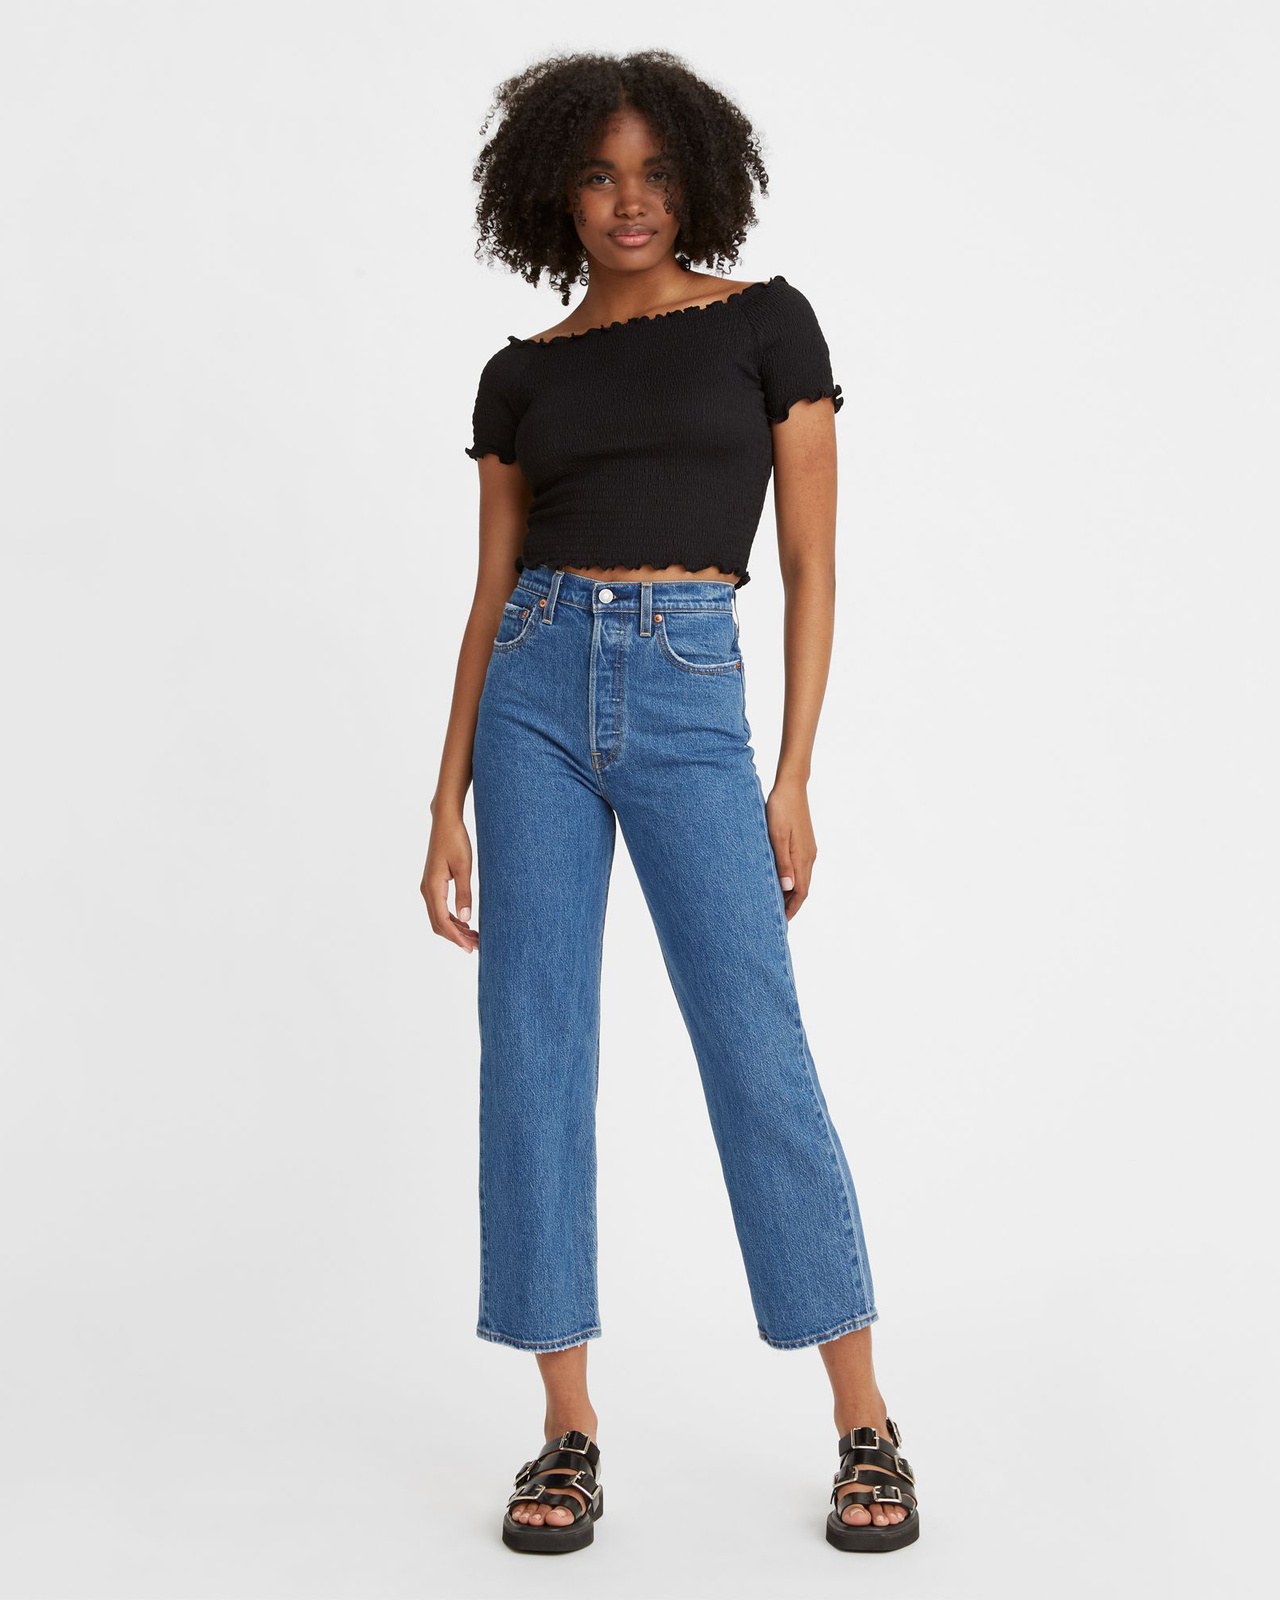 Jeans Ribcage Straight Ankle - Jazz Pop - 29/29